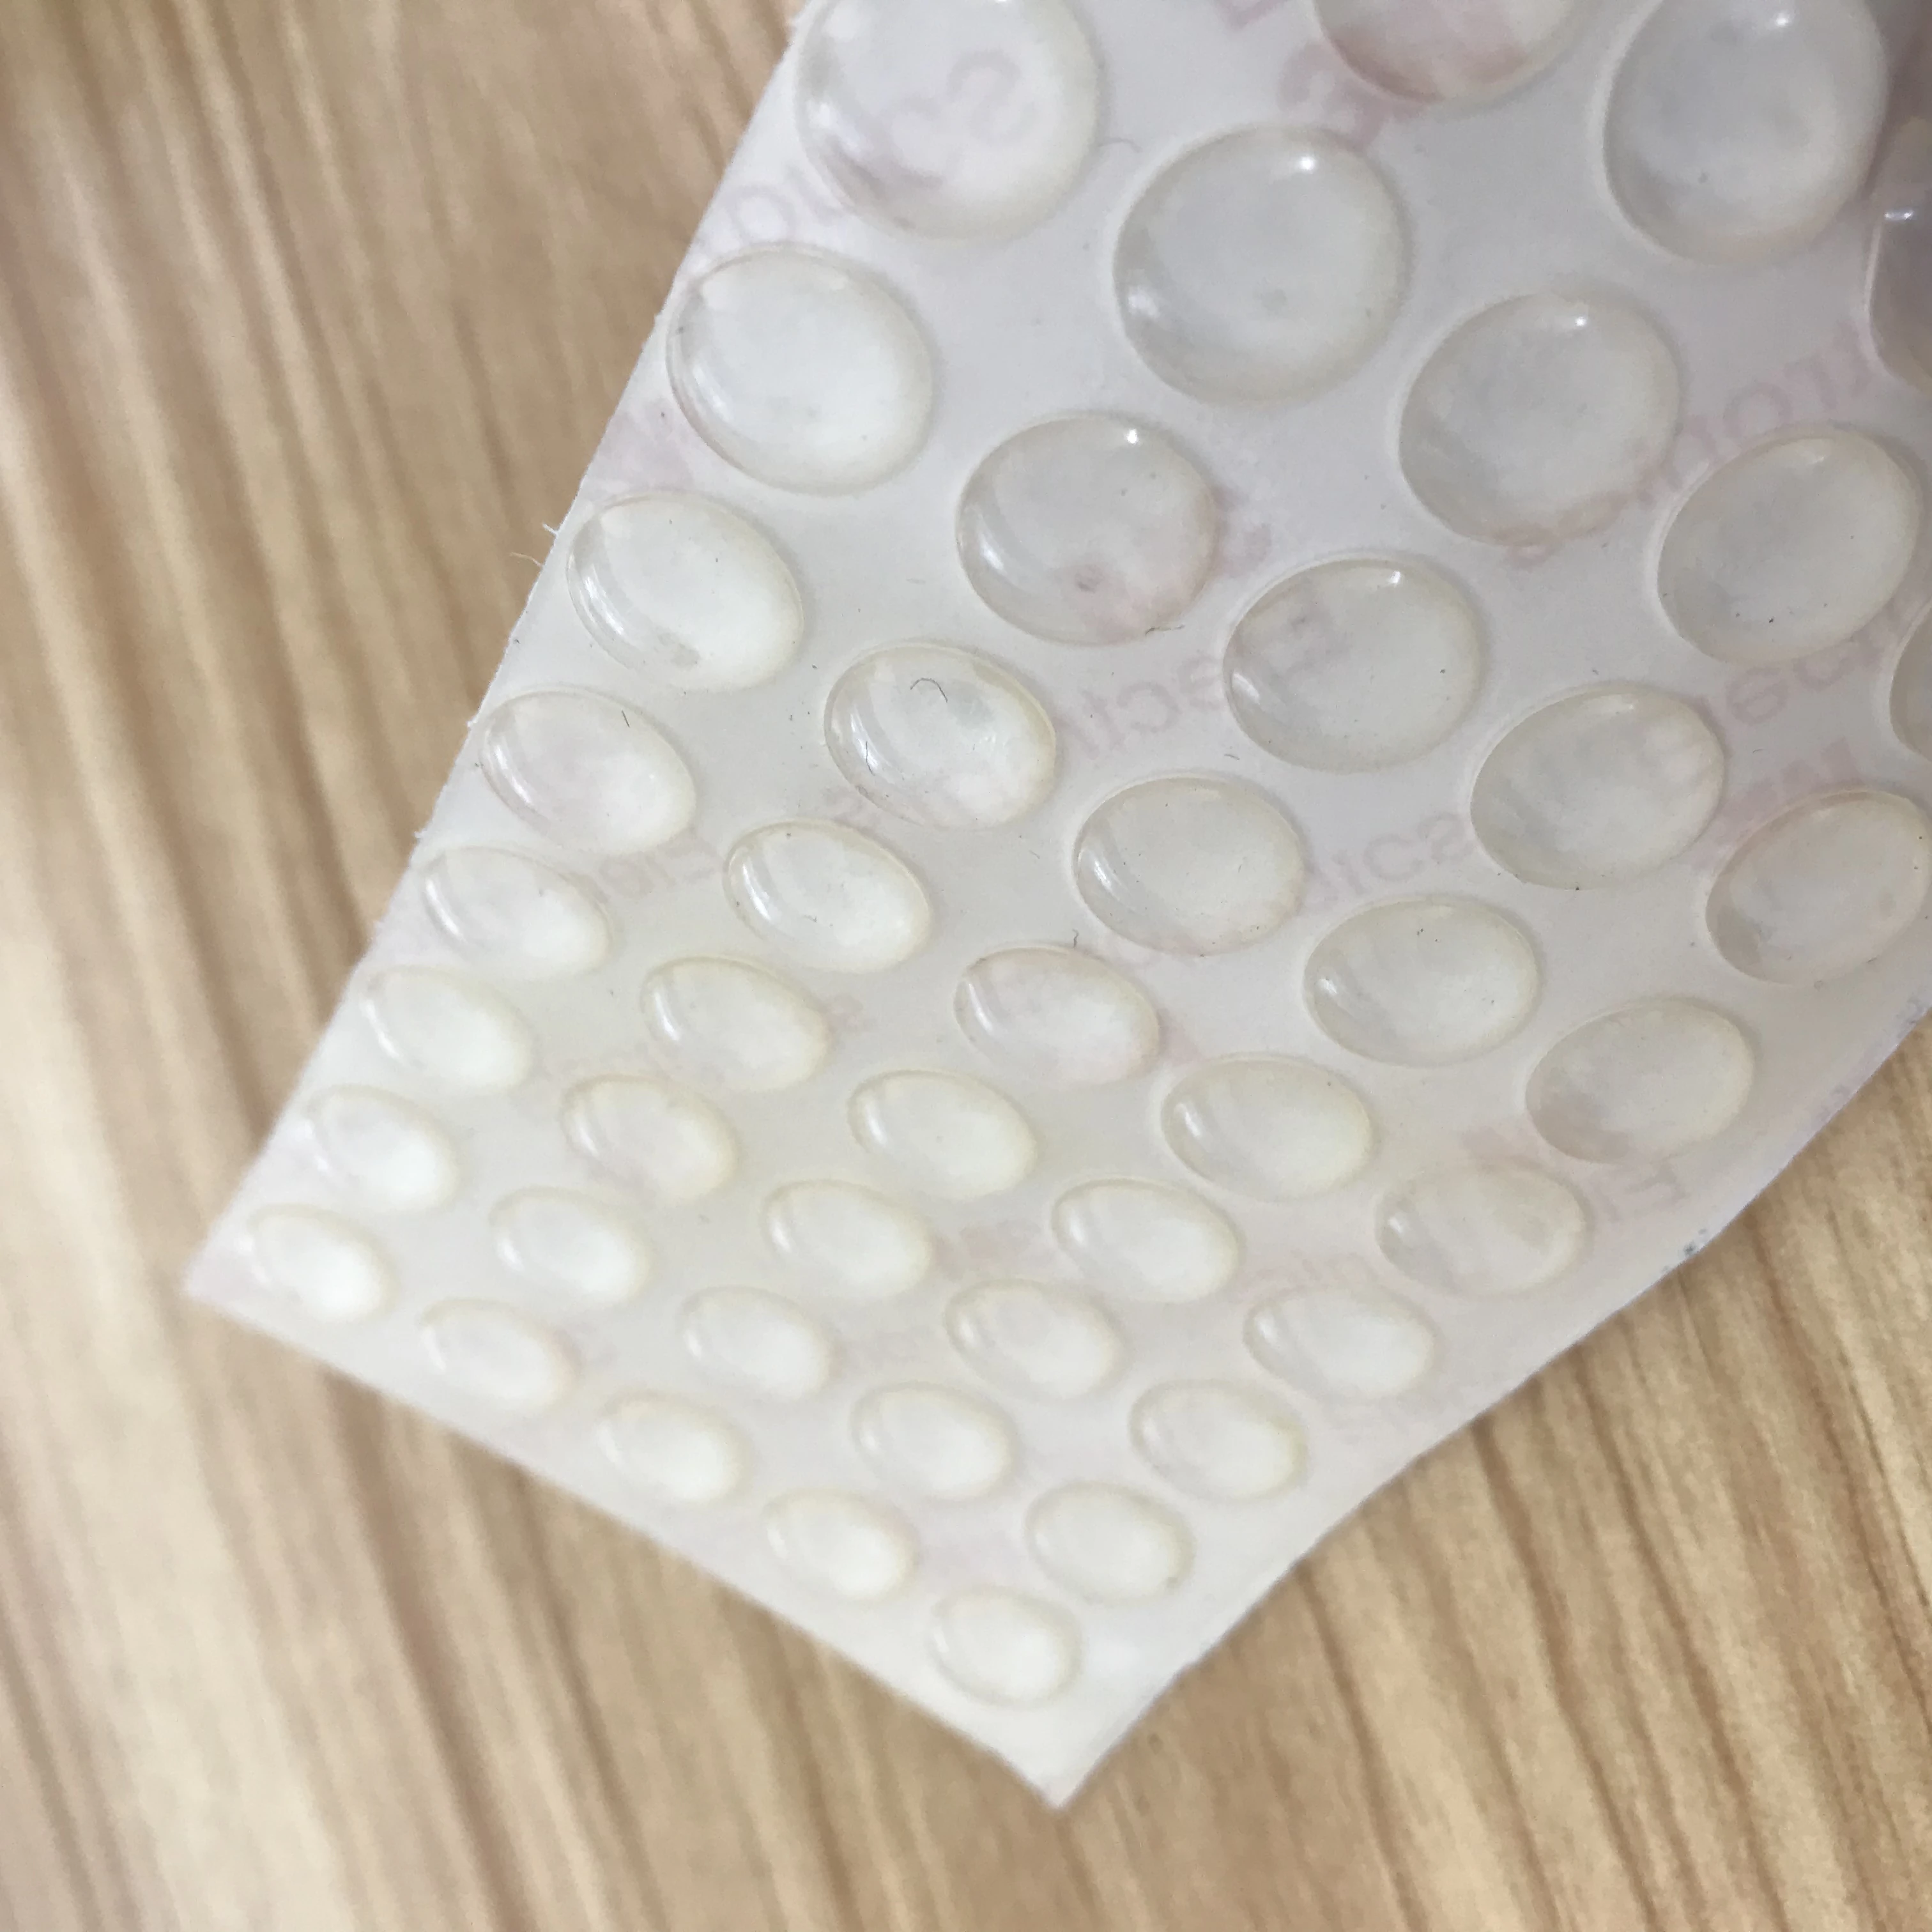 Self adhesive silicone rubber  feet model for ironing board for chair